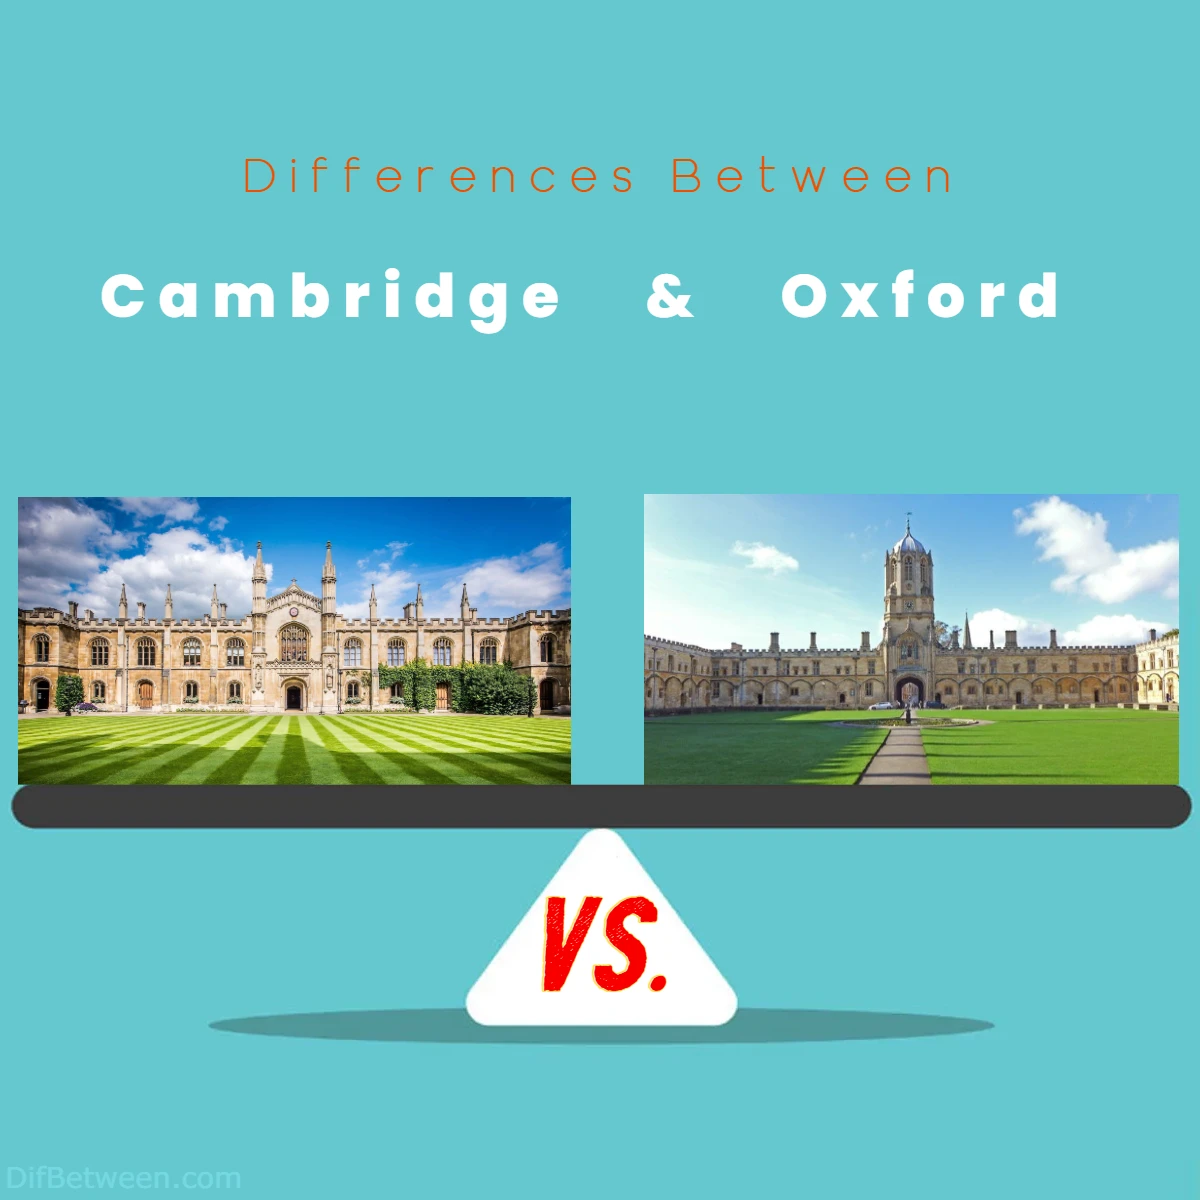 Differences Between Cambridge vs Oxford